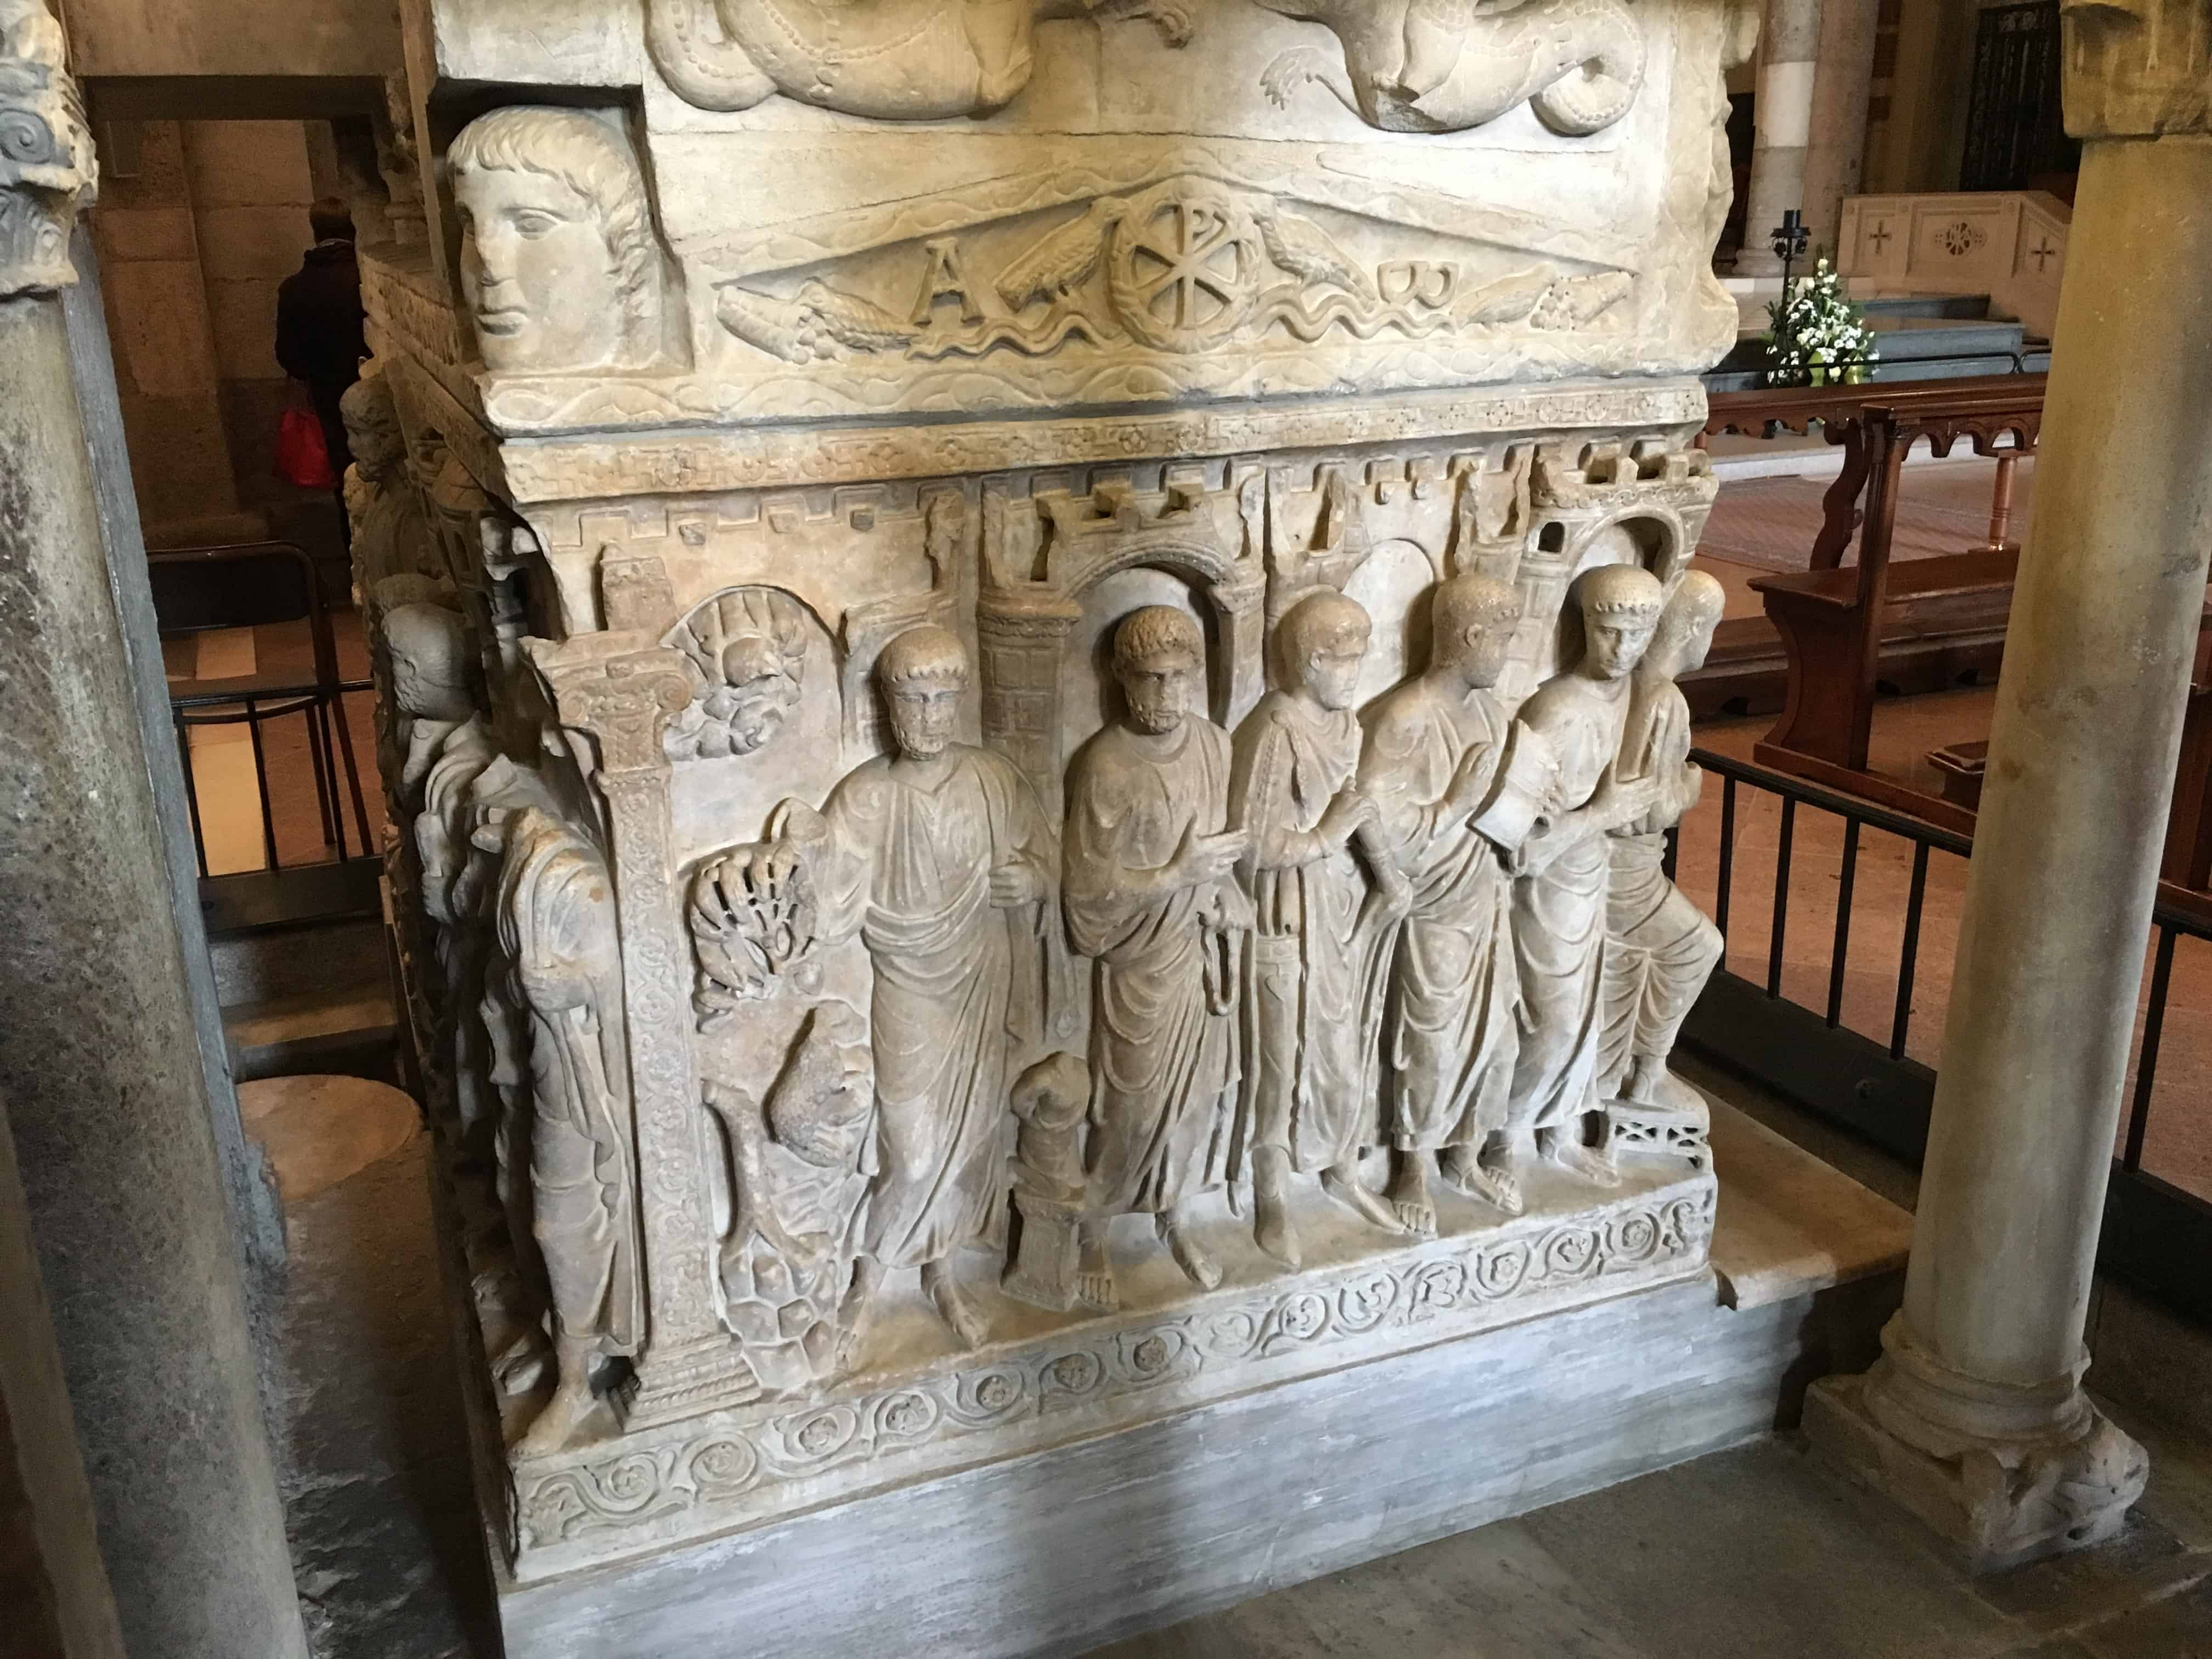 Stilicho's Sepulchre at the Basilica of Saint Ambrose in Milan, Italy